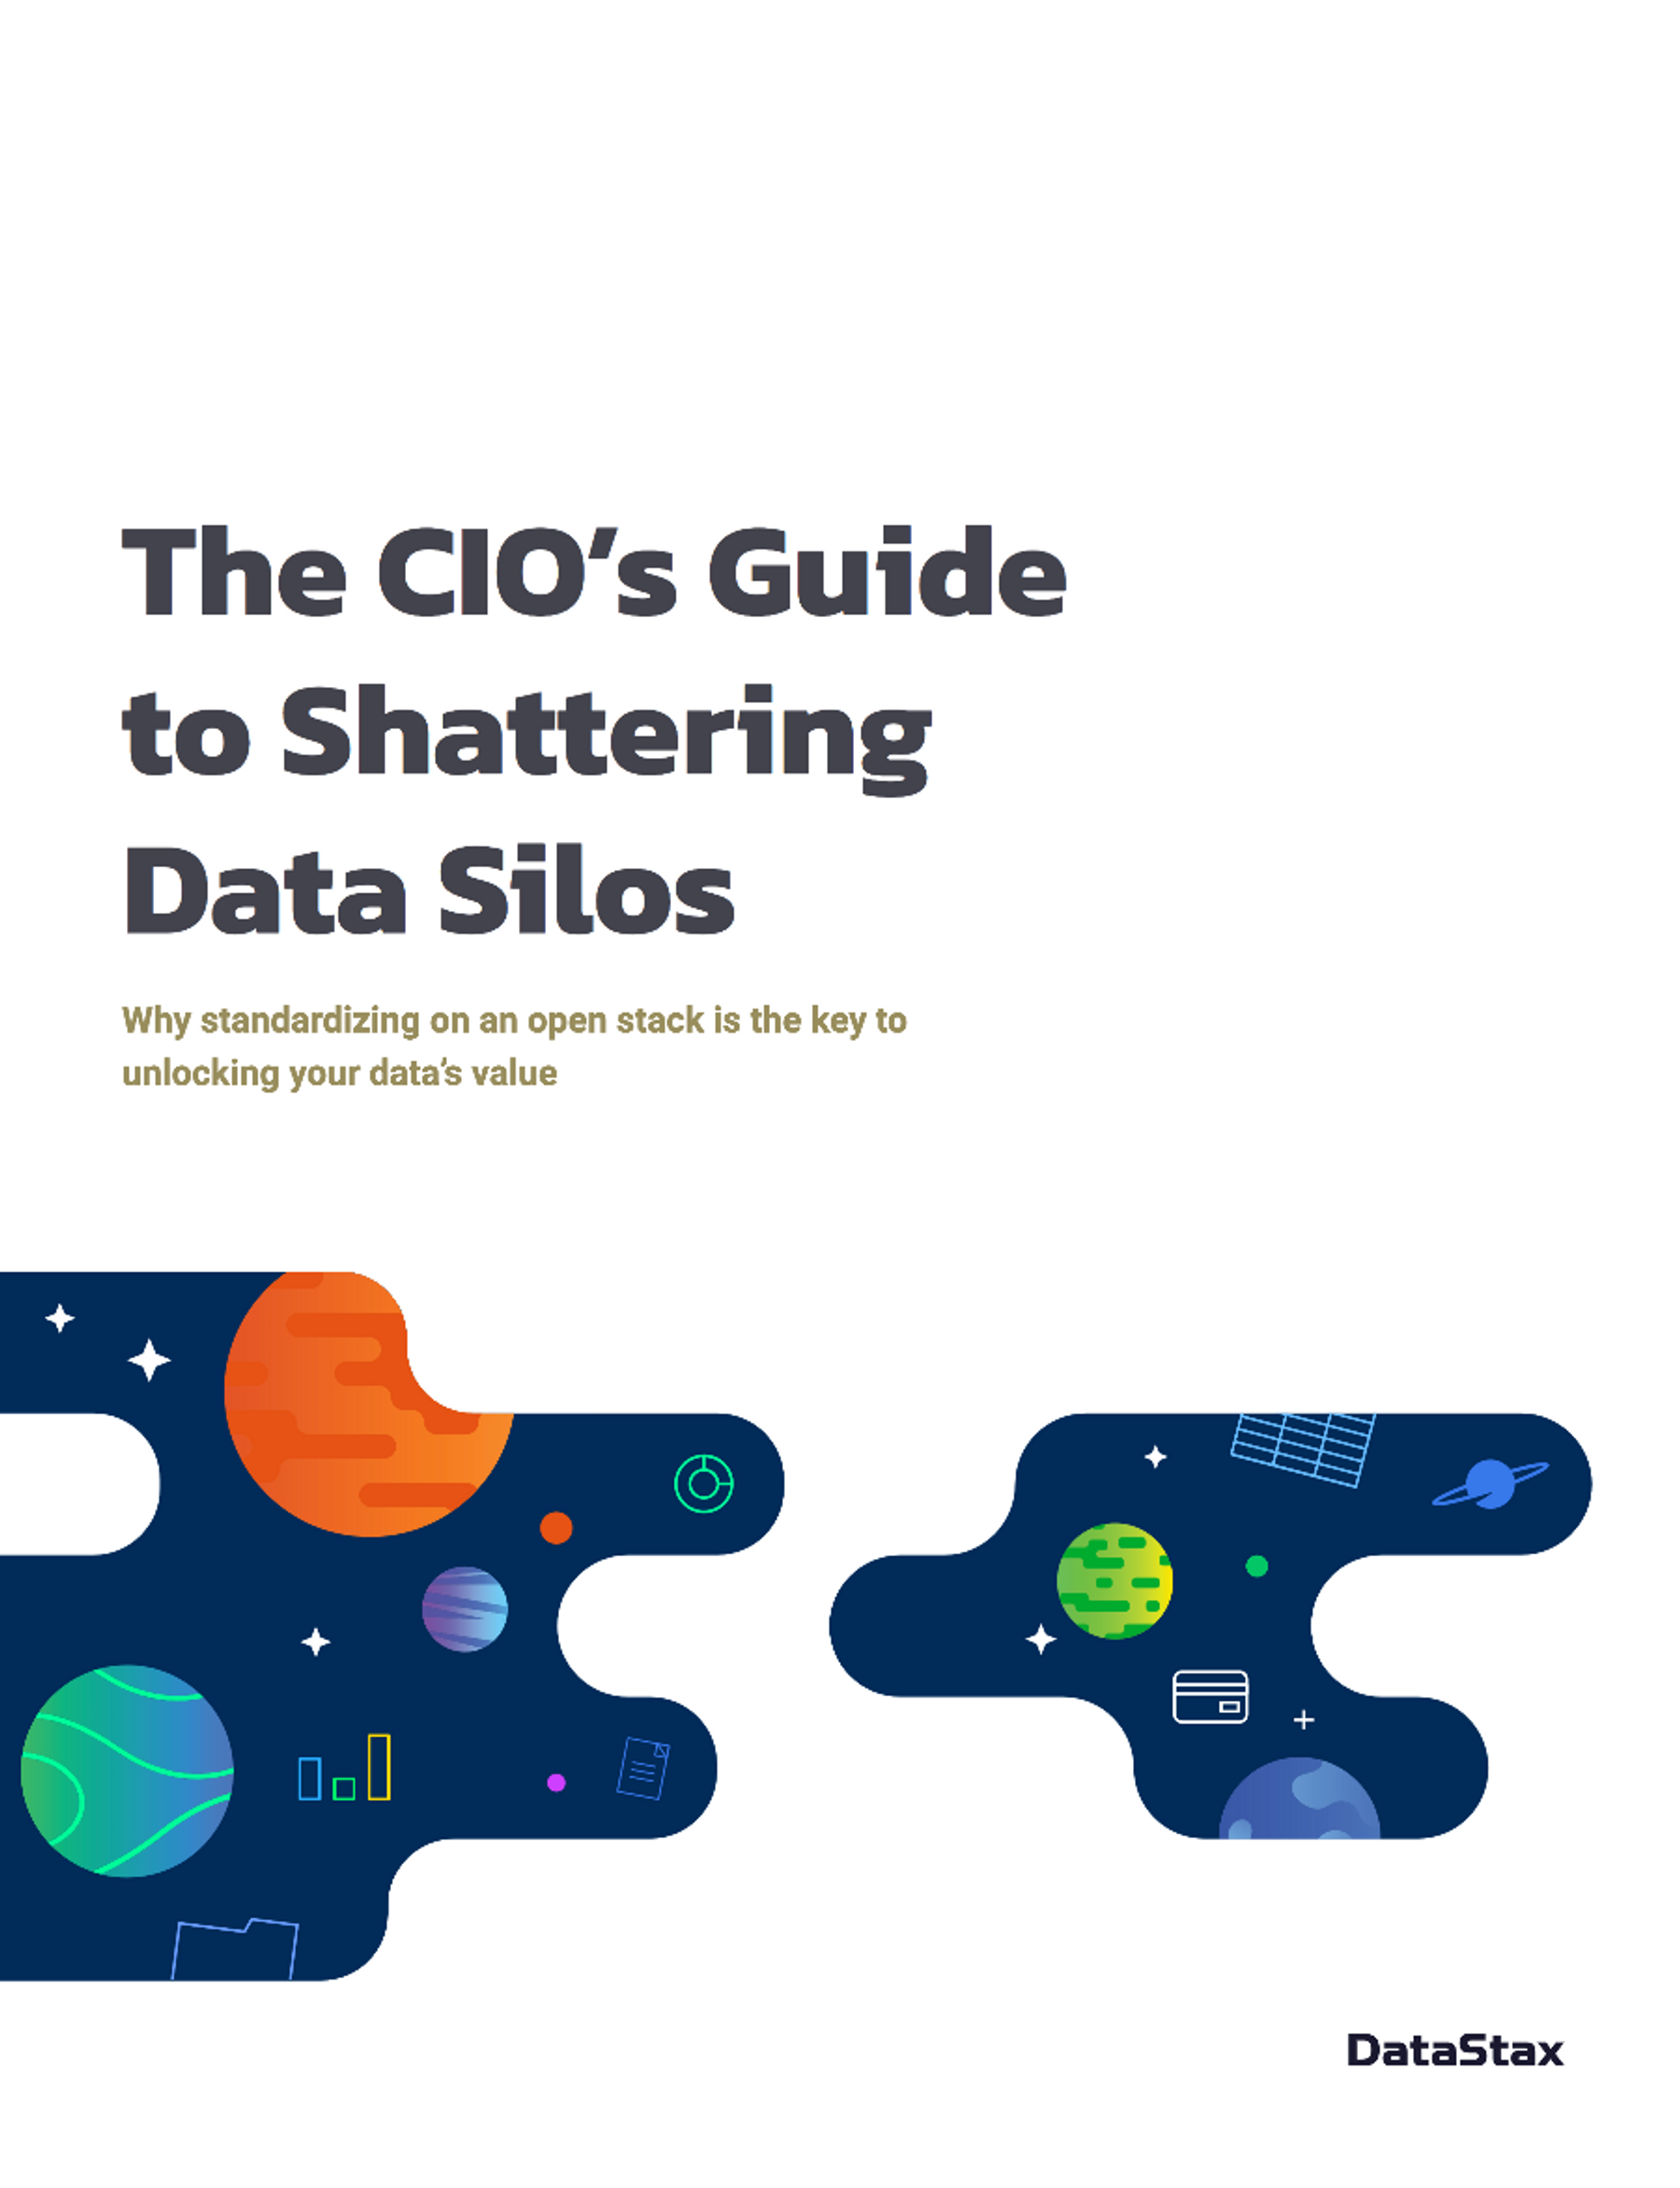 The CIO’s Guide to Shattering Data Silos